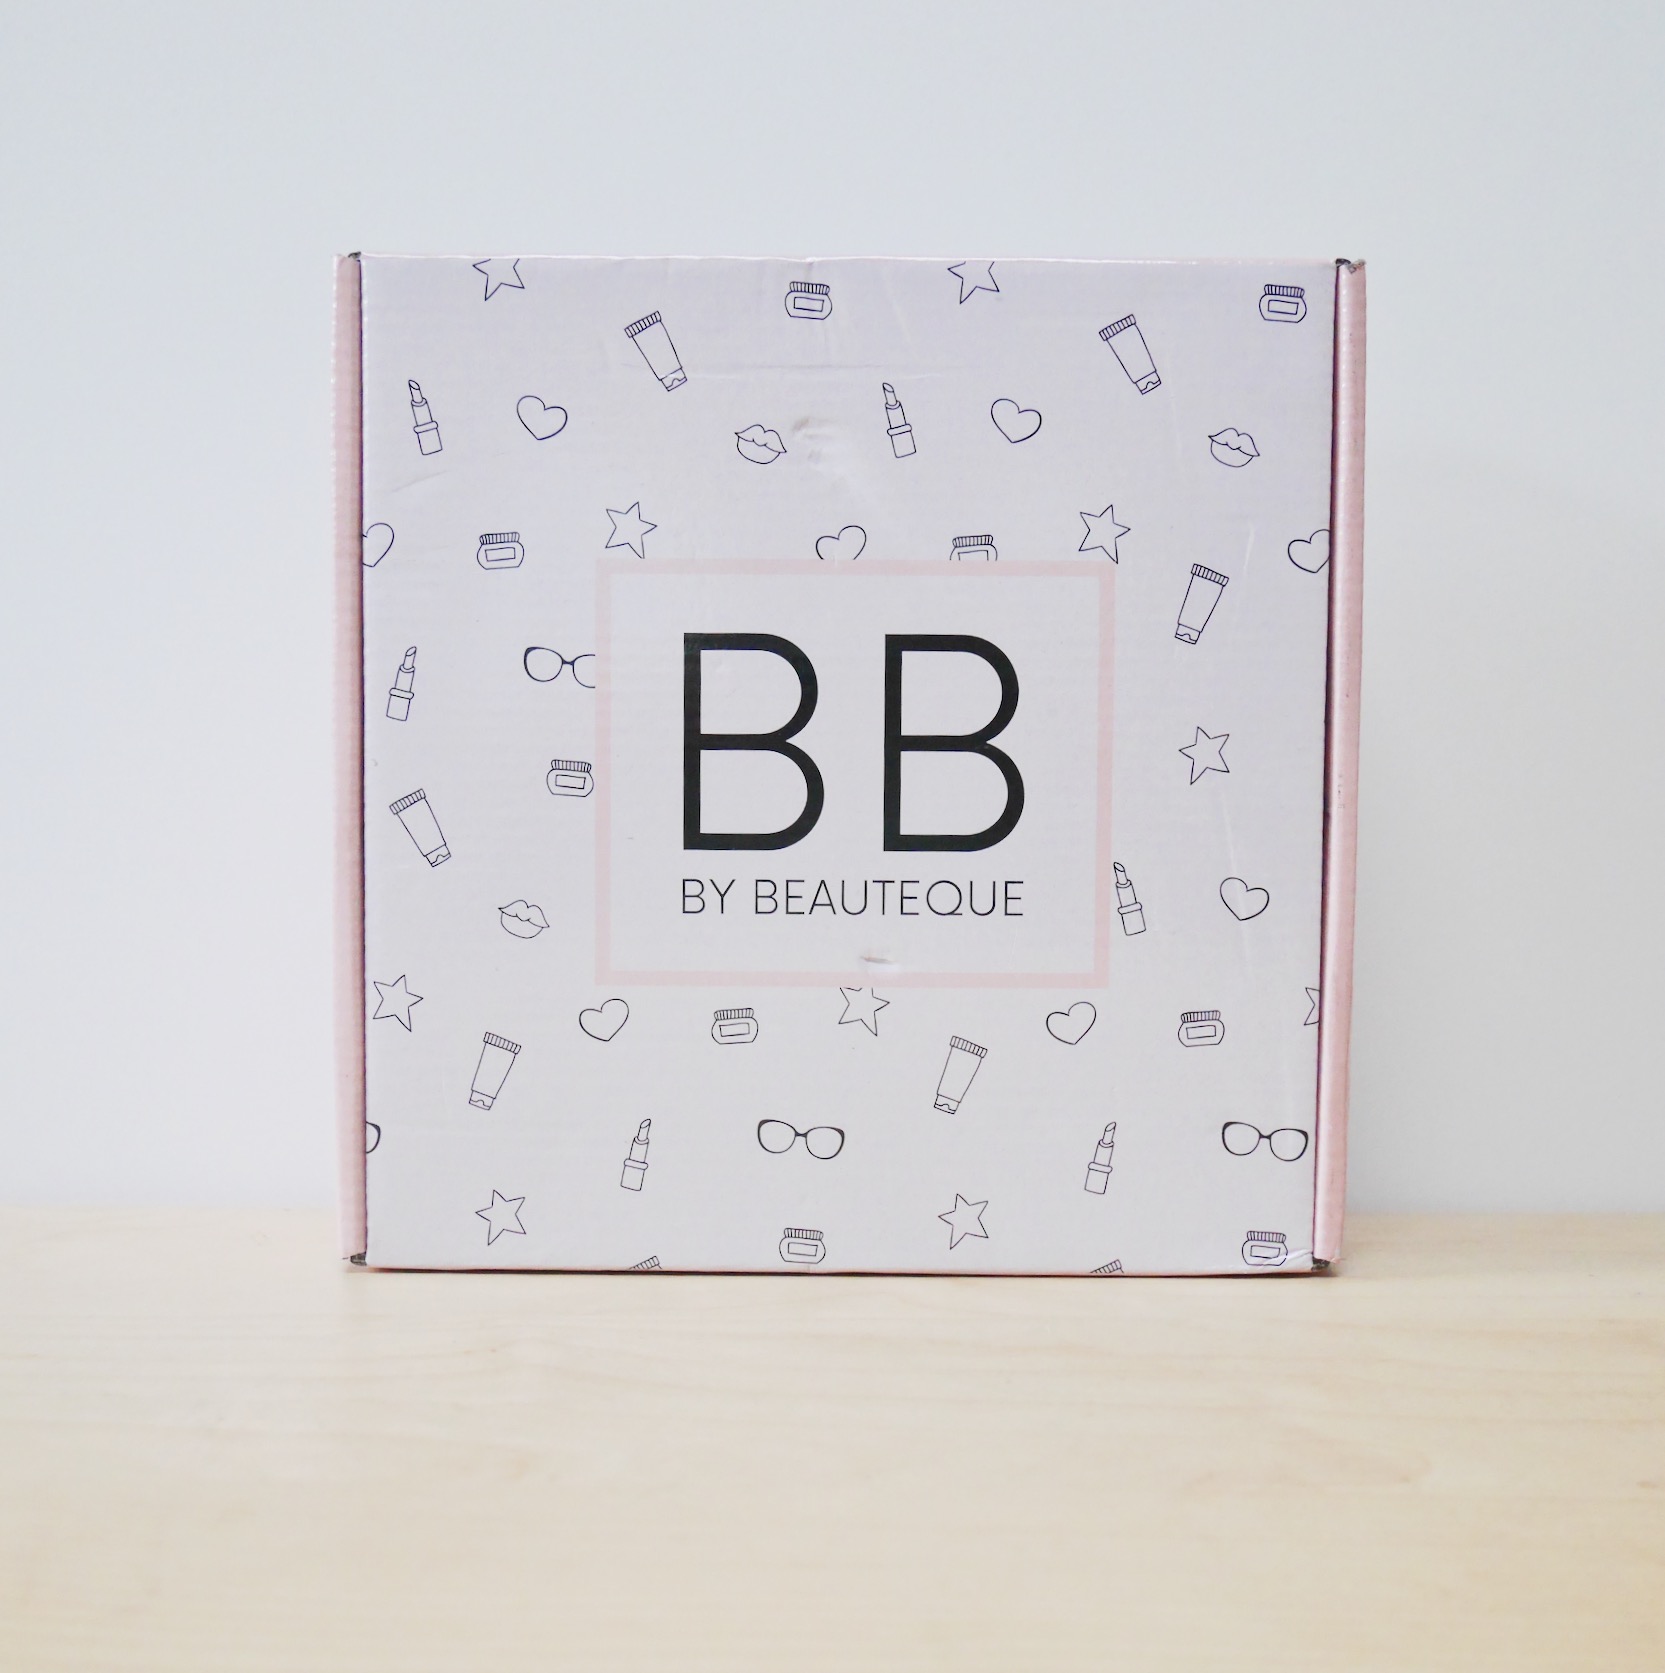 Beauteque BB Bag Subscription Review + Coupon – September 2017